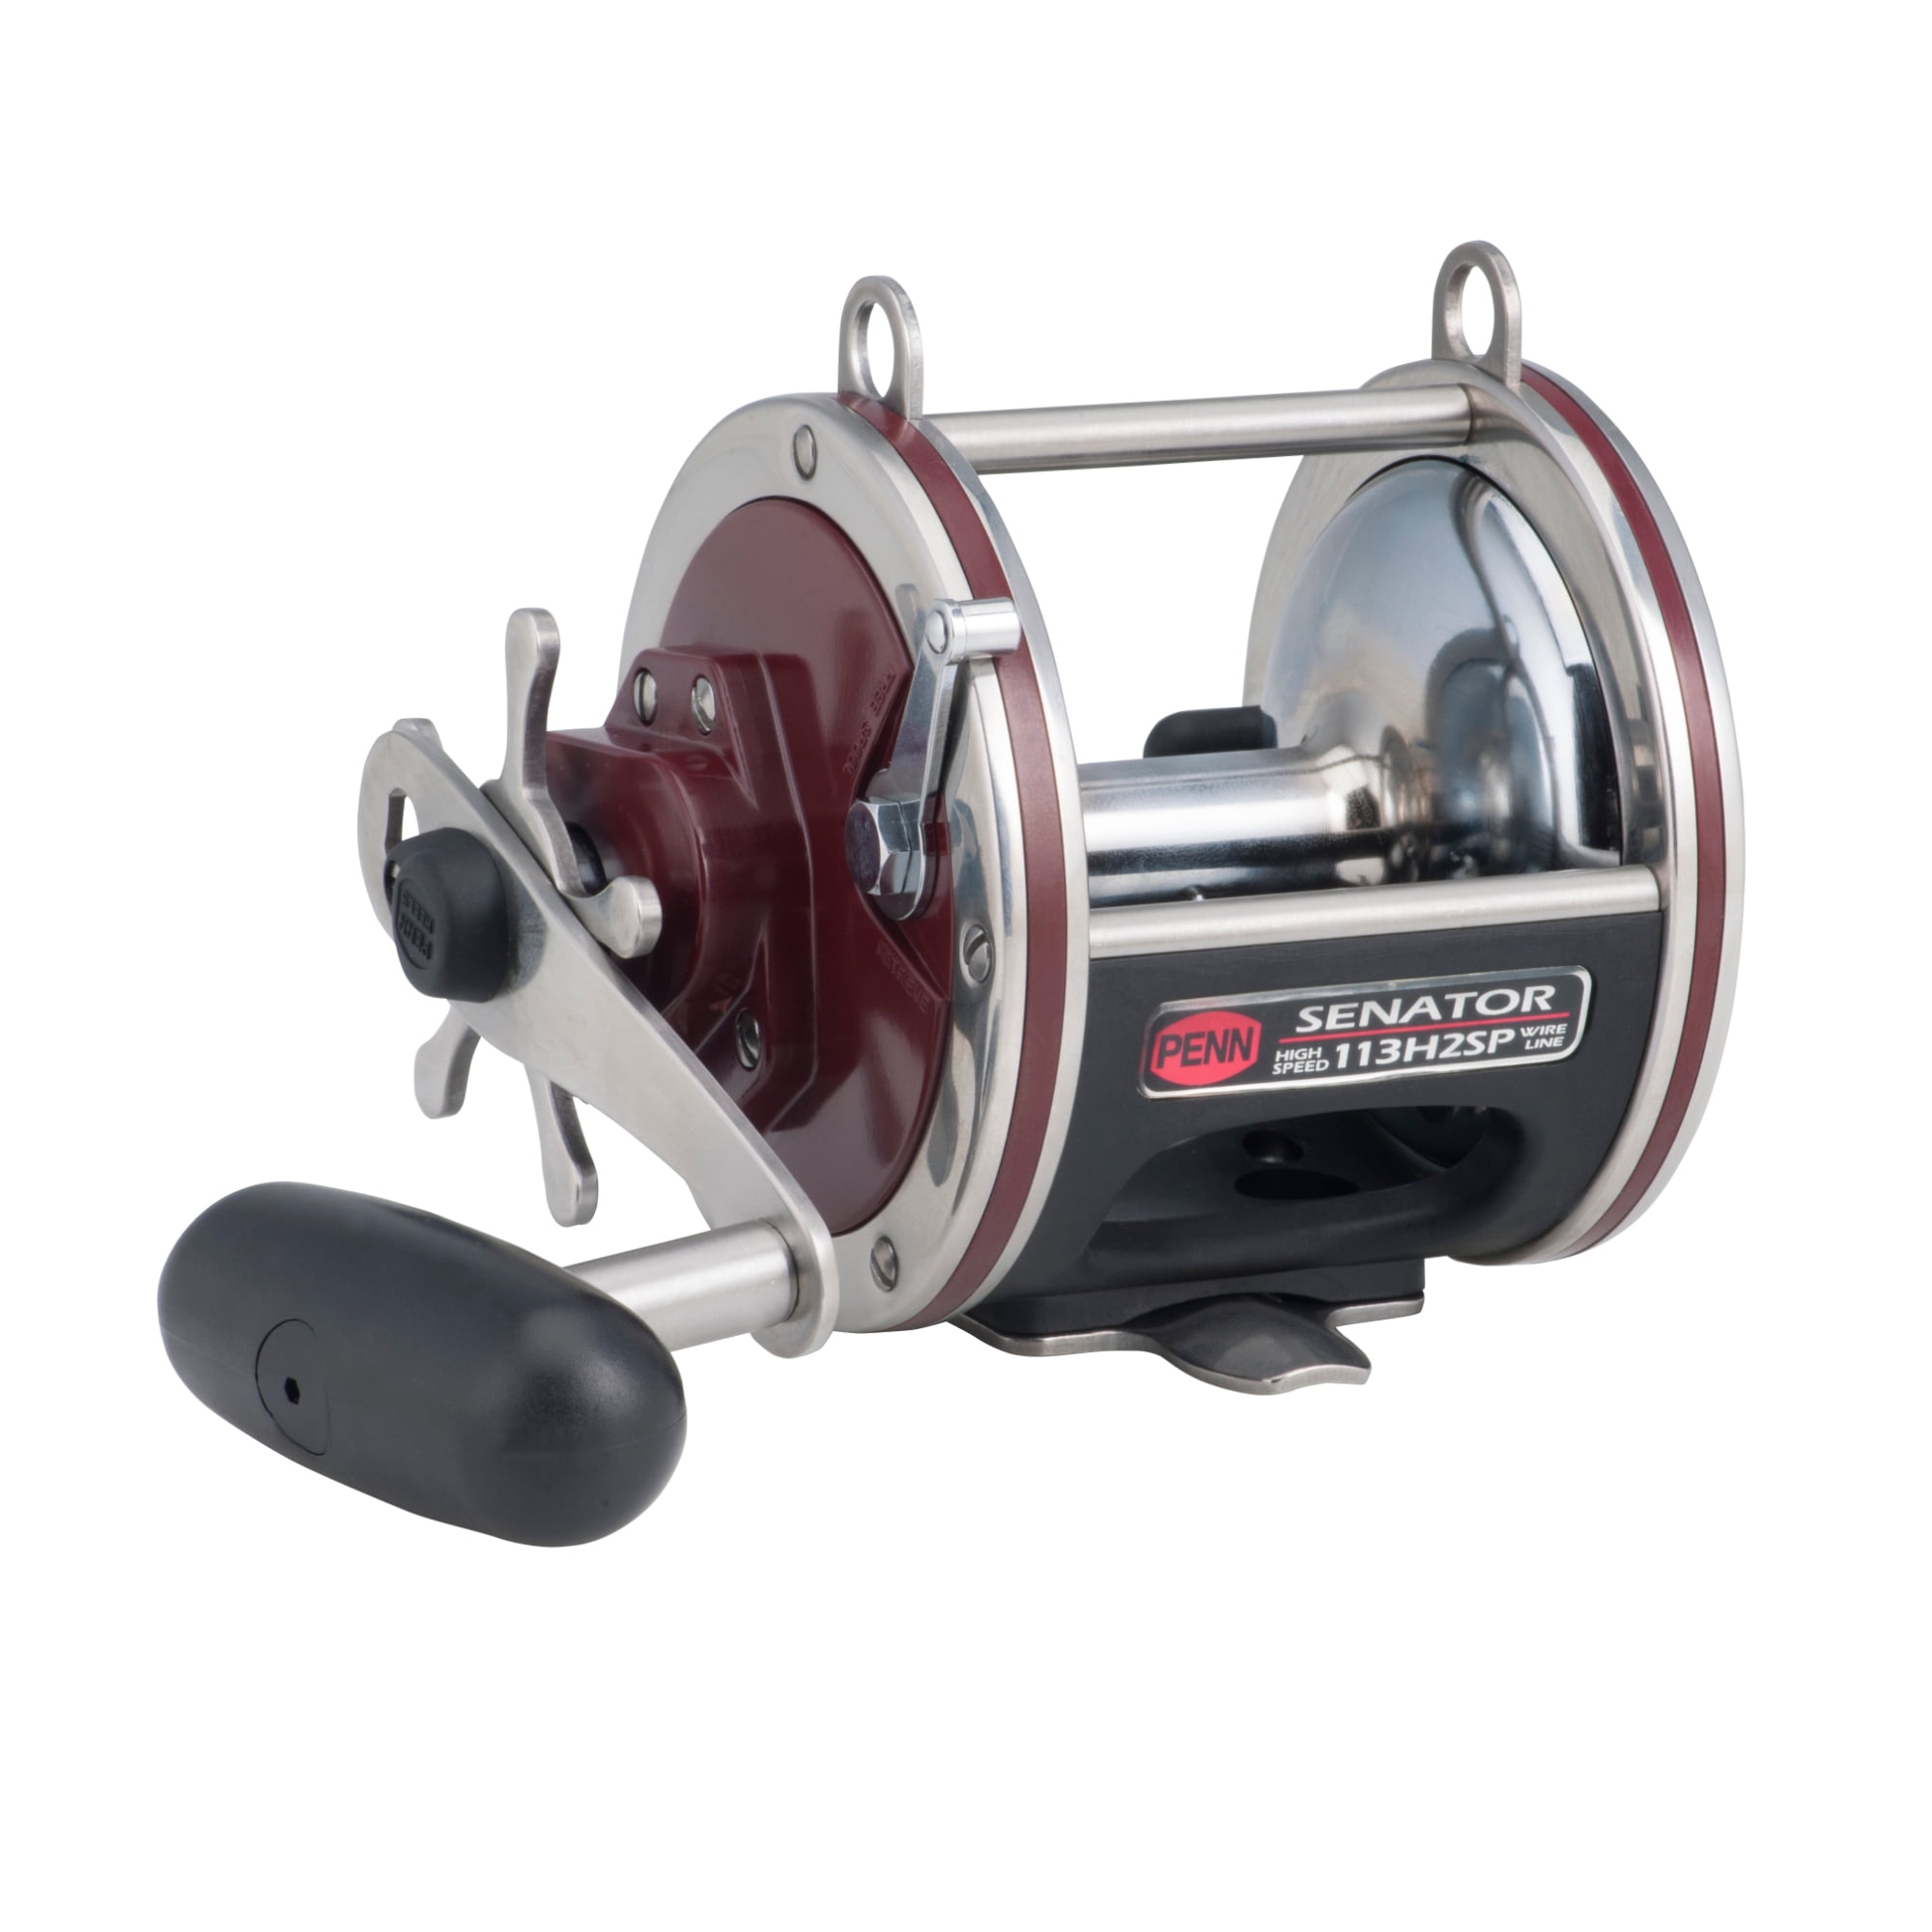 PENN Special Senator Conventional Combo, Reel Size 114 